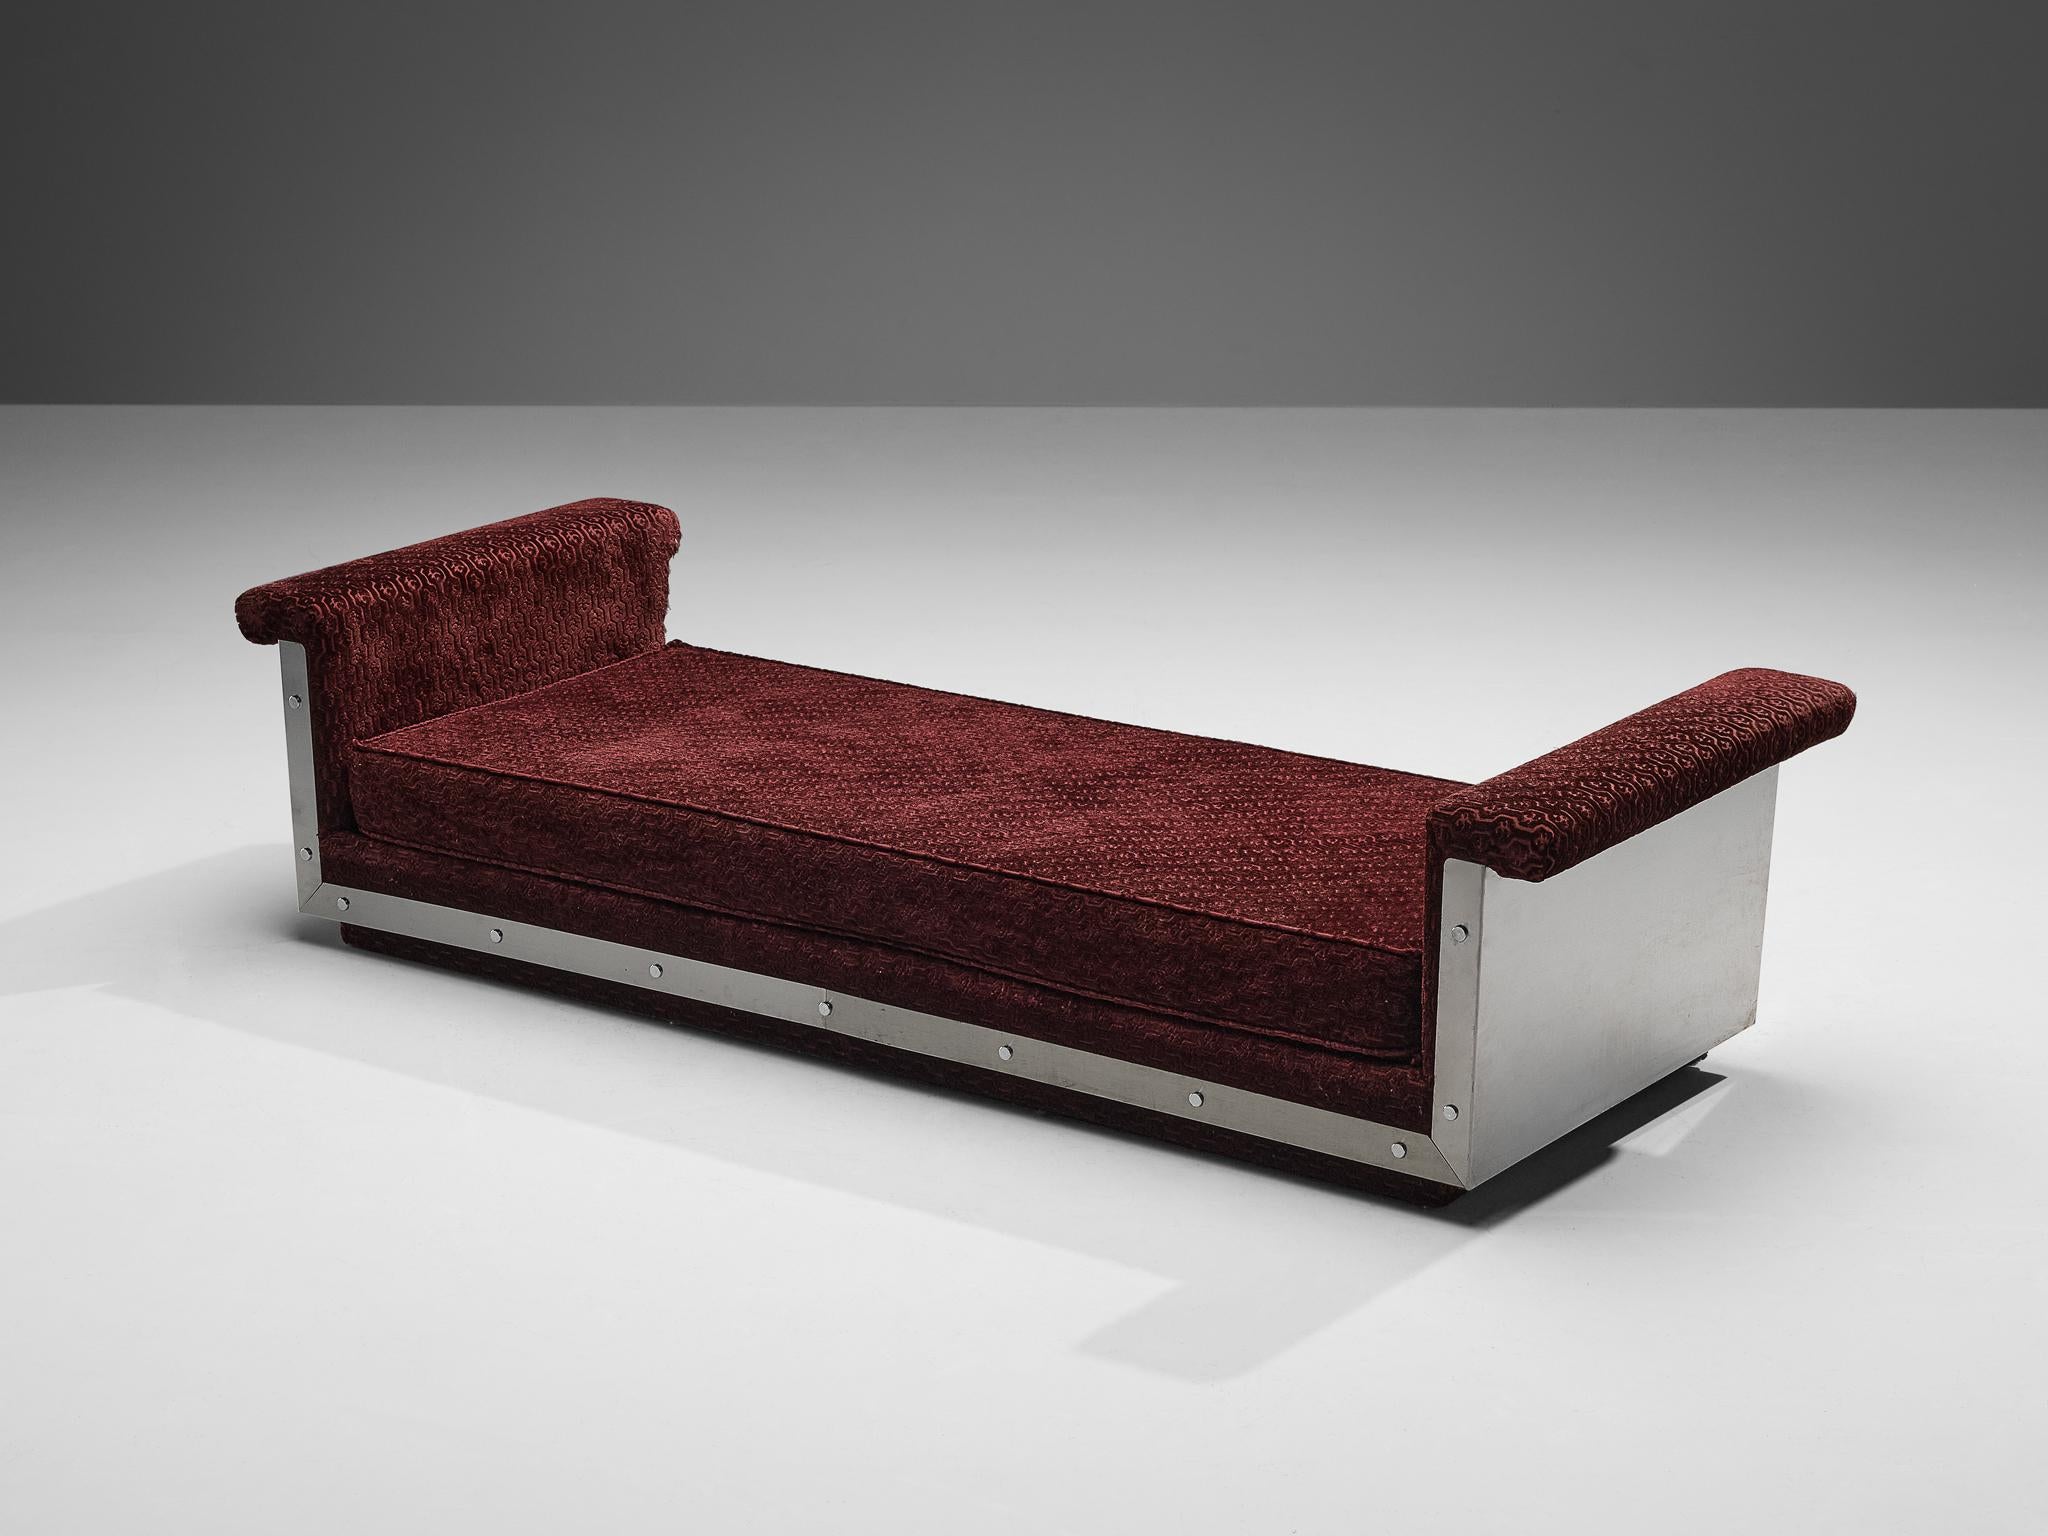 French Daybed in Stainless Steel and Burgundy Velvet Upholstery